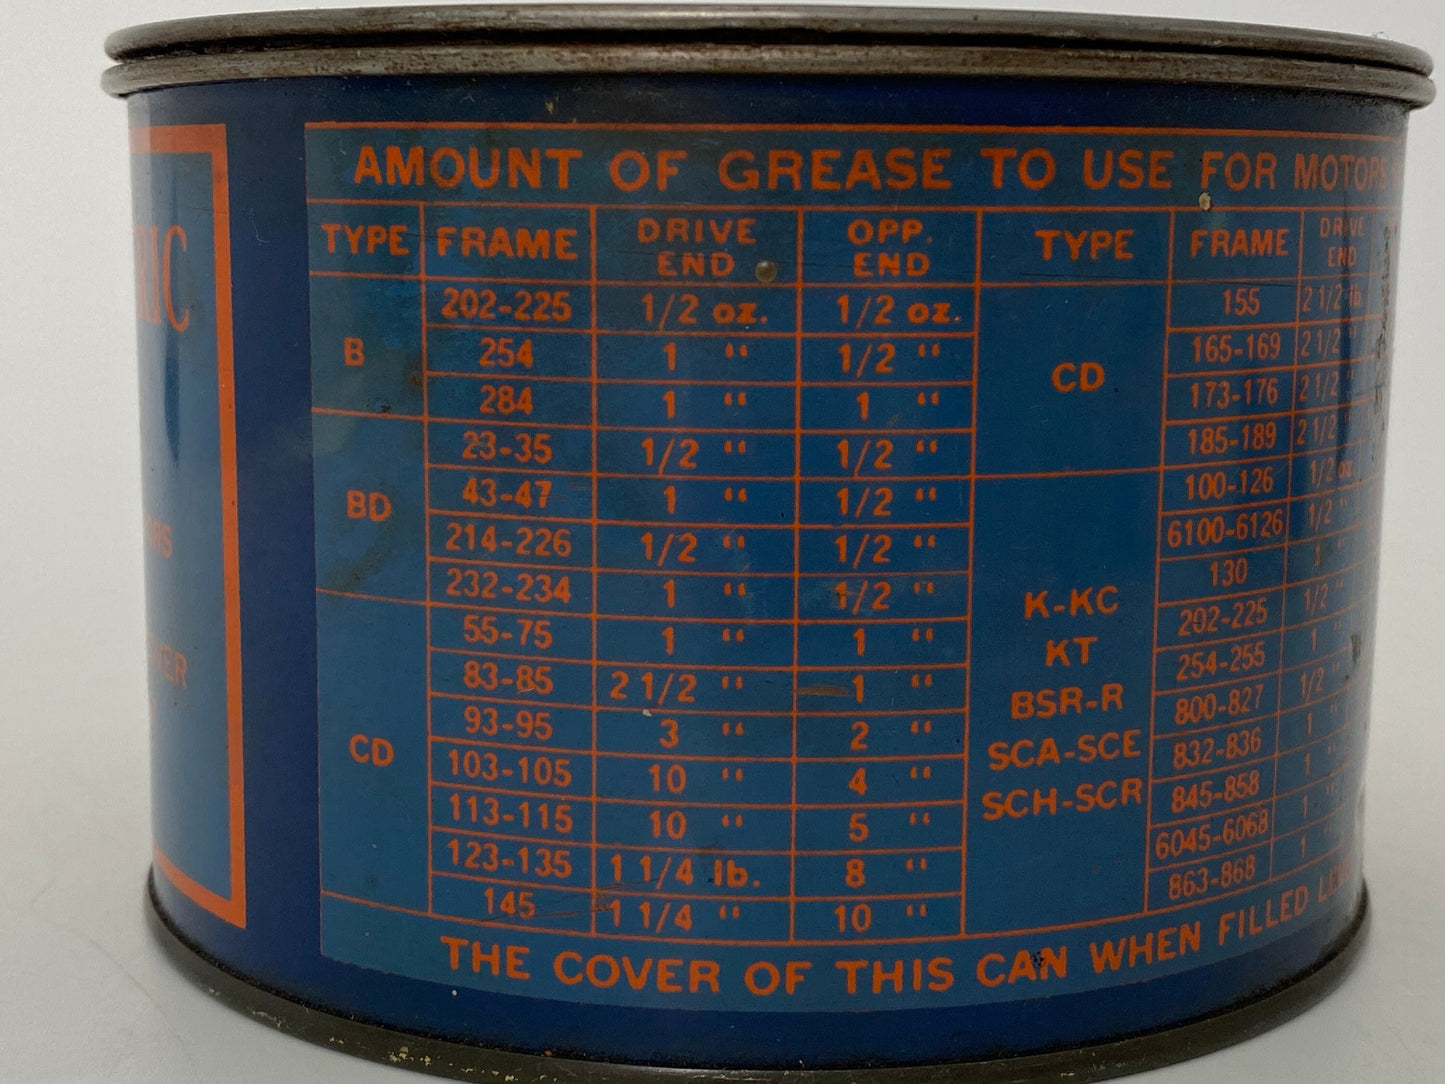 Midcentury General Electric Grease Tin Can